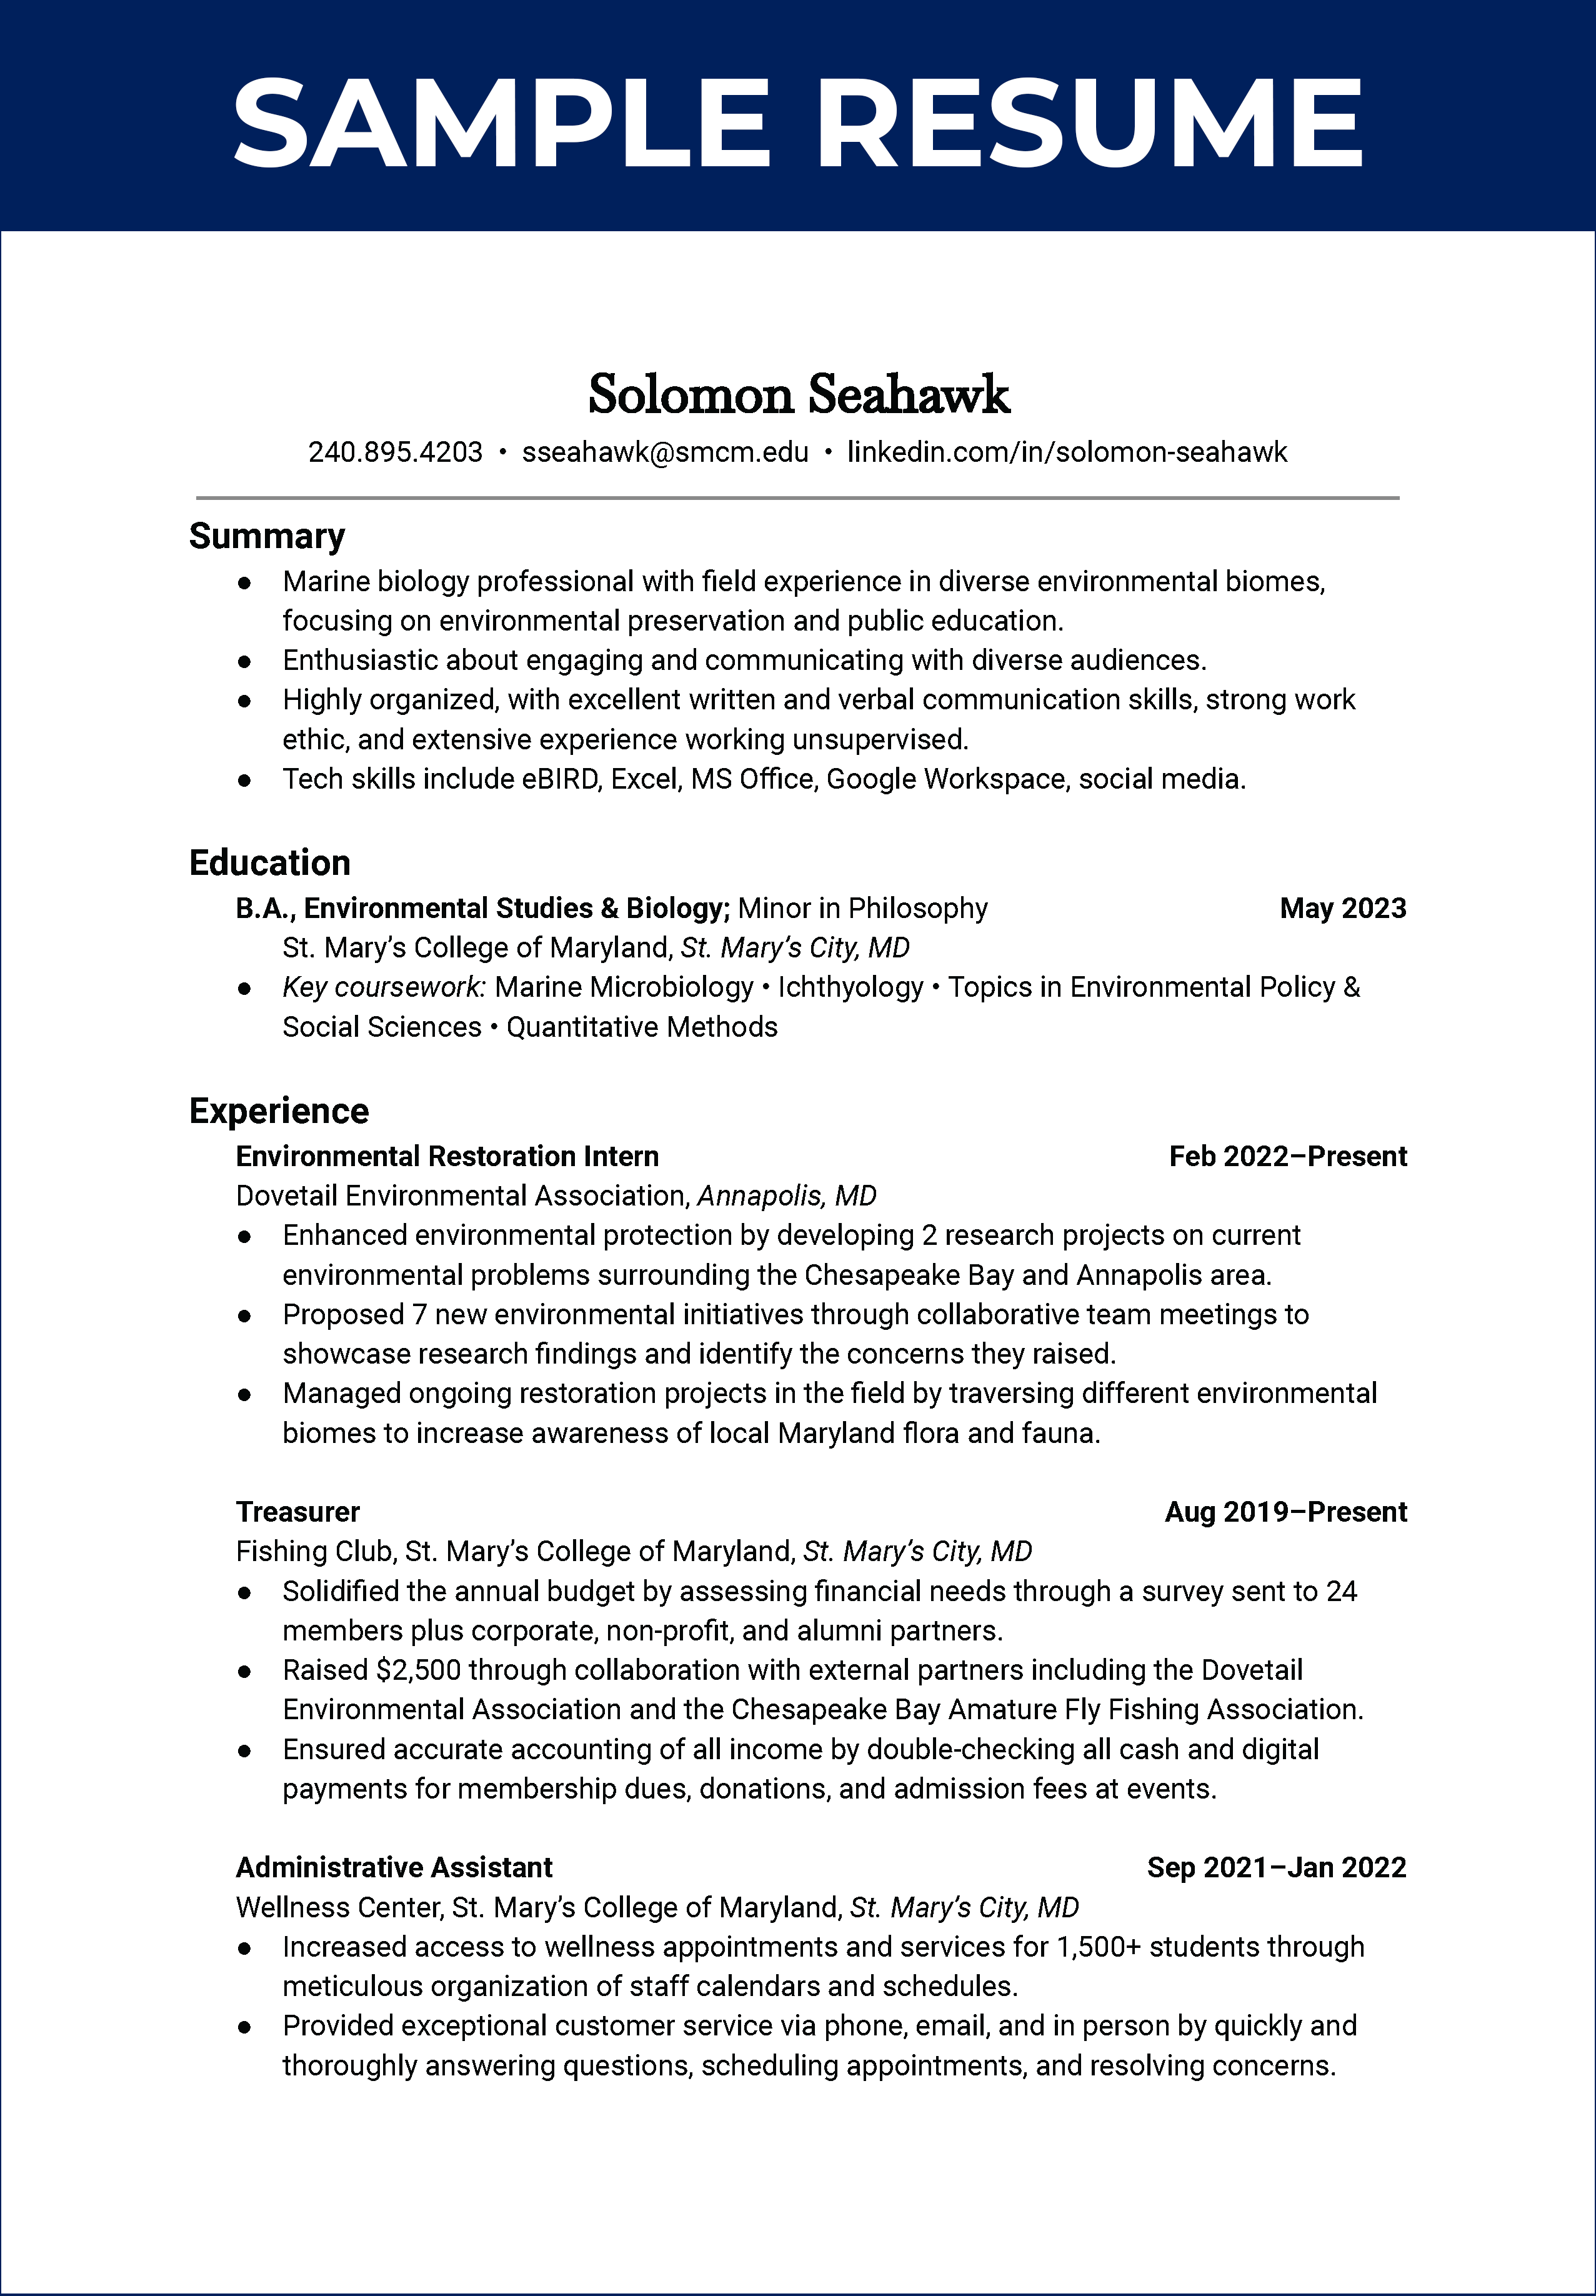 Example of a formatted resume